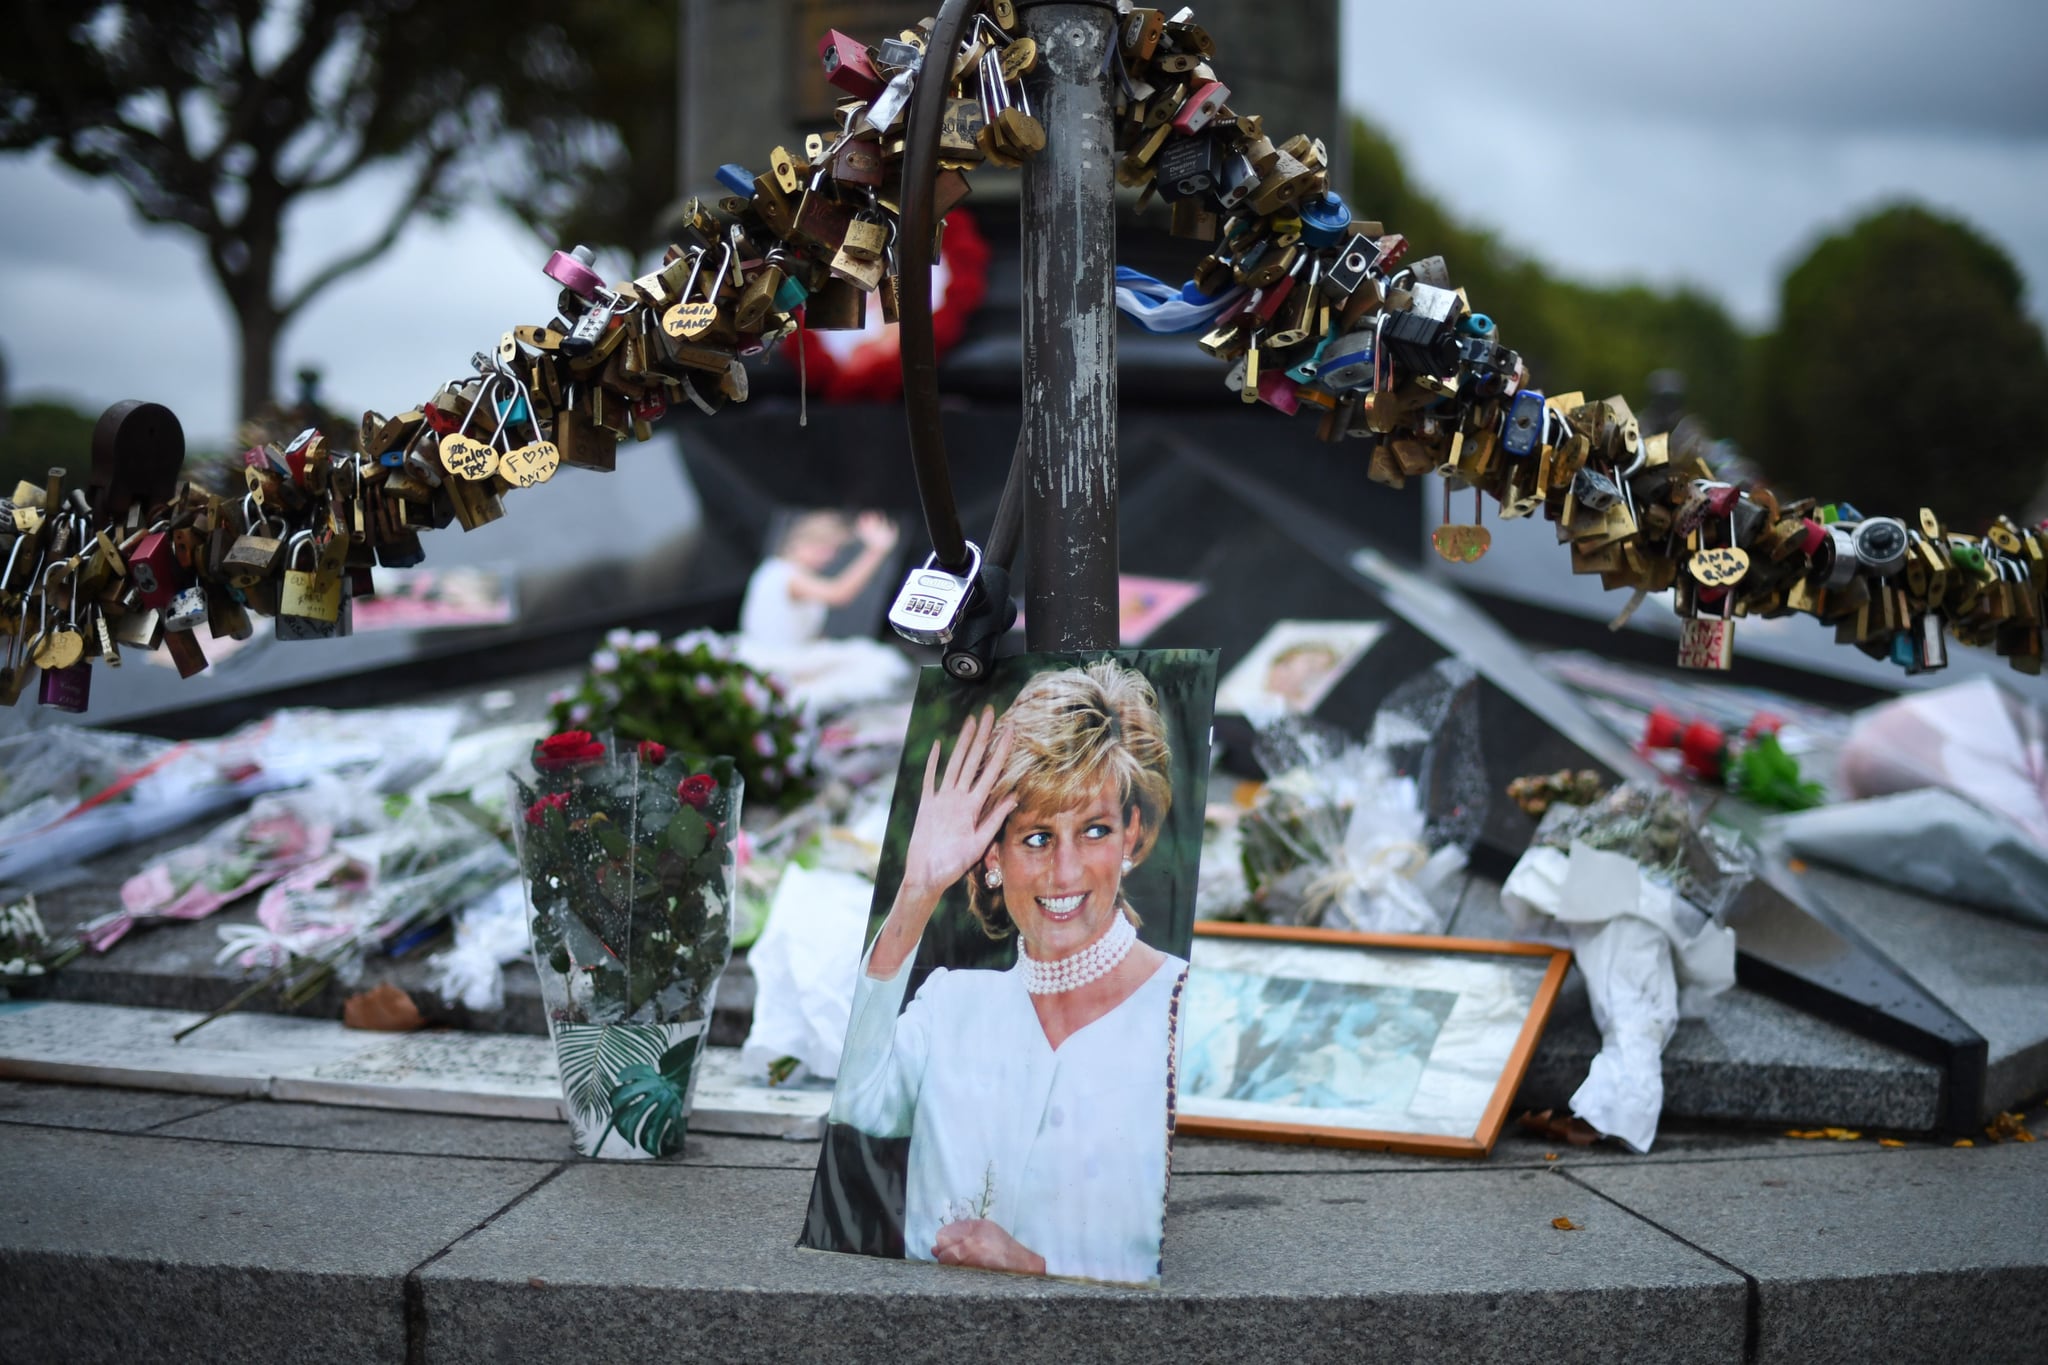 TOPSHOT - Photographs of Diana, Princess of Wales, are seen on August 30, 2017 with locks and floral tributes left over the Alma bridge in Paris  to mark the coming 20th anniversary of the death of Diana who died in a car crash in a nearby tunnel on August 31, 1997.The life of Diana -- a shy, teenage aristocrat who suddenly became the world's most famous woman -- and her tragic death at 36 still captivates millions across the globe. Diana died in a car crash in Paris in the early hours of August 31, 1997, along with Dodi Fayed, her wealthy Egyptian film producer boyfriend of two months, and a drink-impaired, speeding driver Henri Paul, who was trying to evade paparazzi. / AFP PHOTO / Eric FEFERBERG        (Photo credit should read ERIC FEFERBERG/AFP/Getty Images)